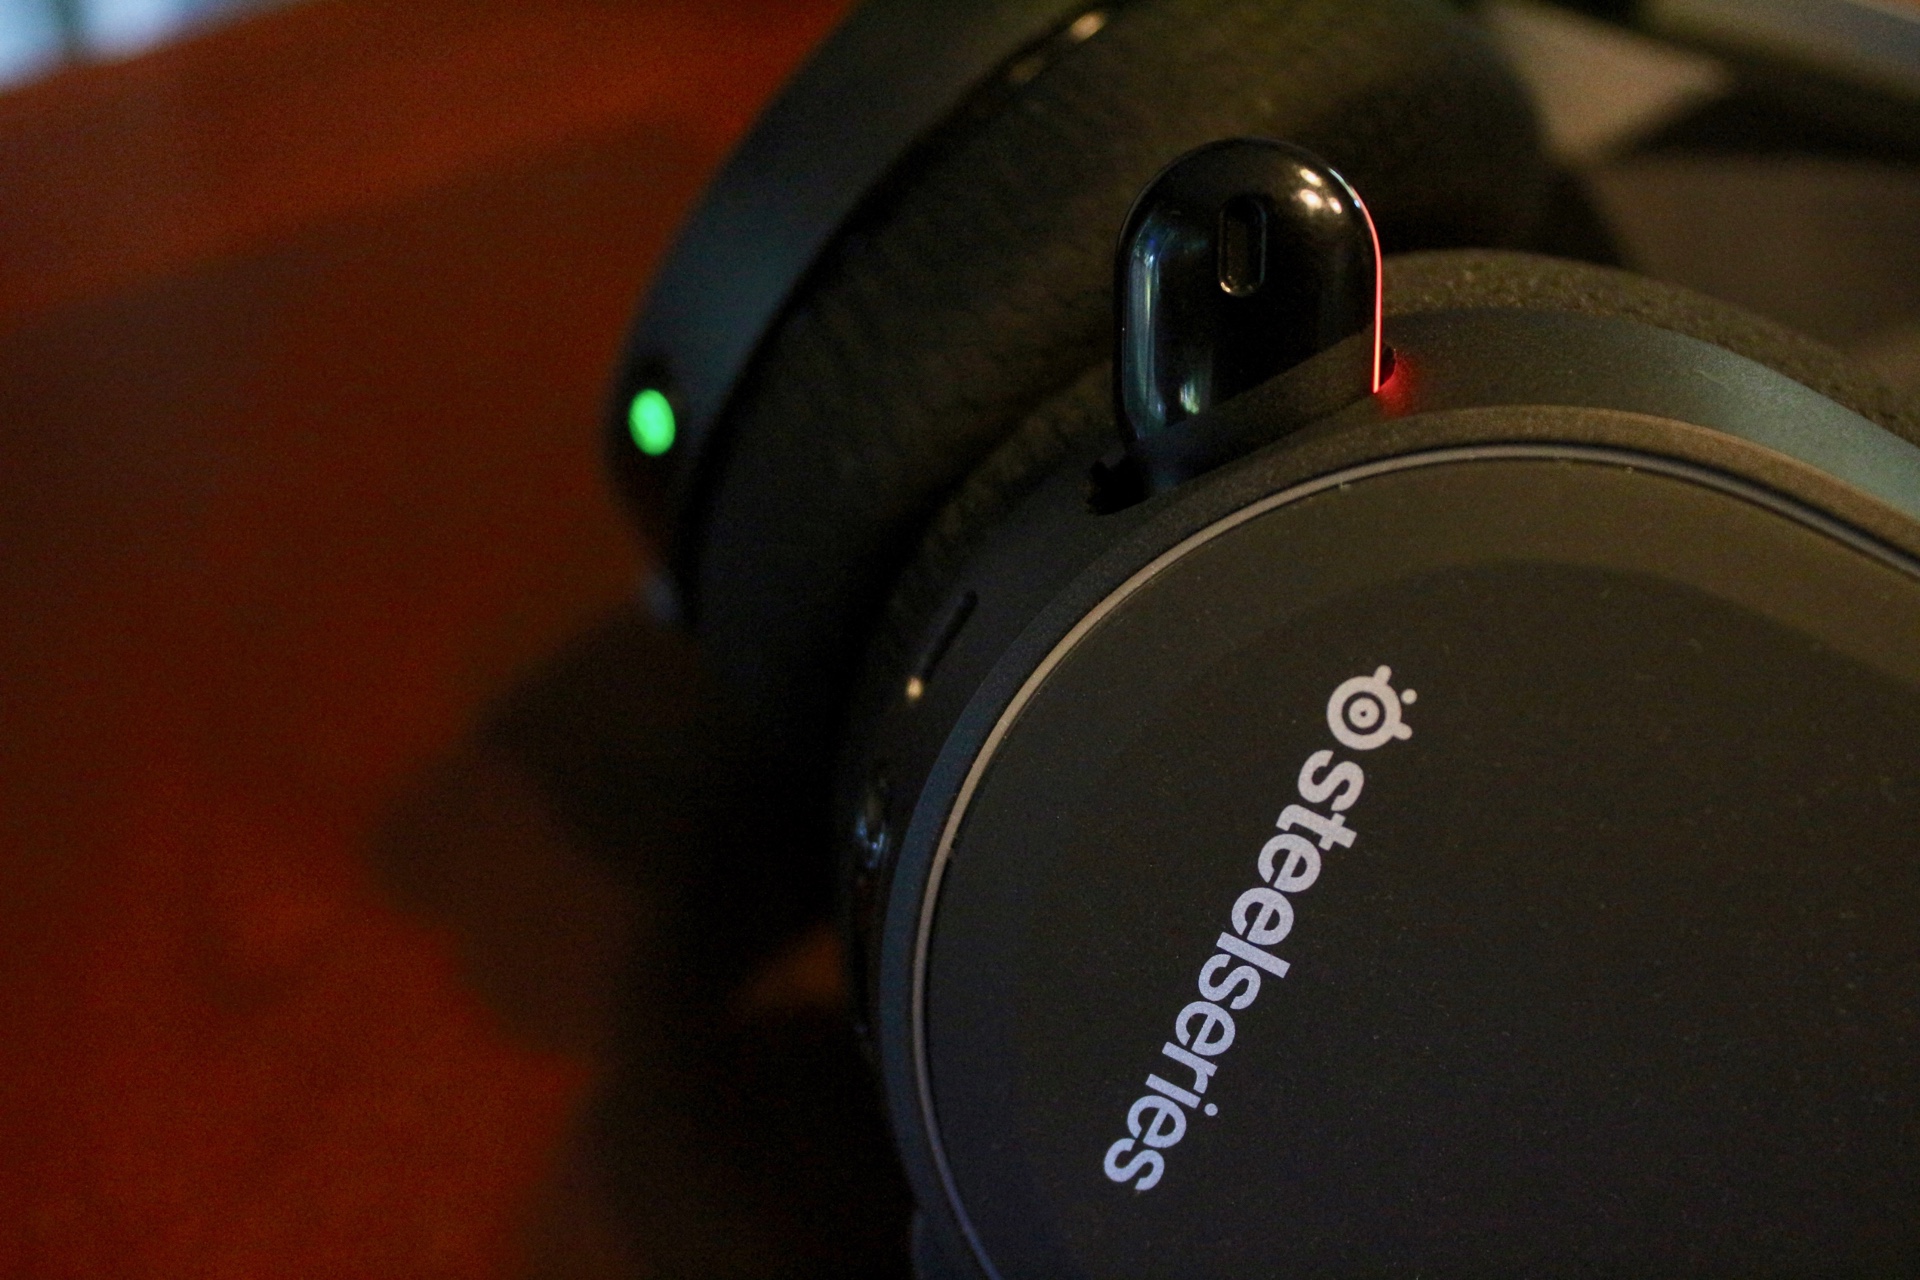 SteelSeries Arctis 7 Mic and Power Button Lighting